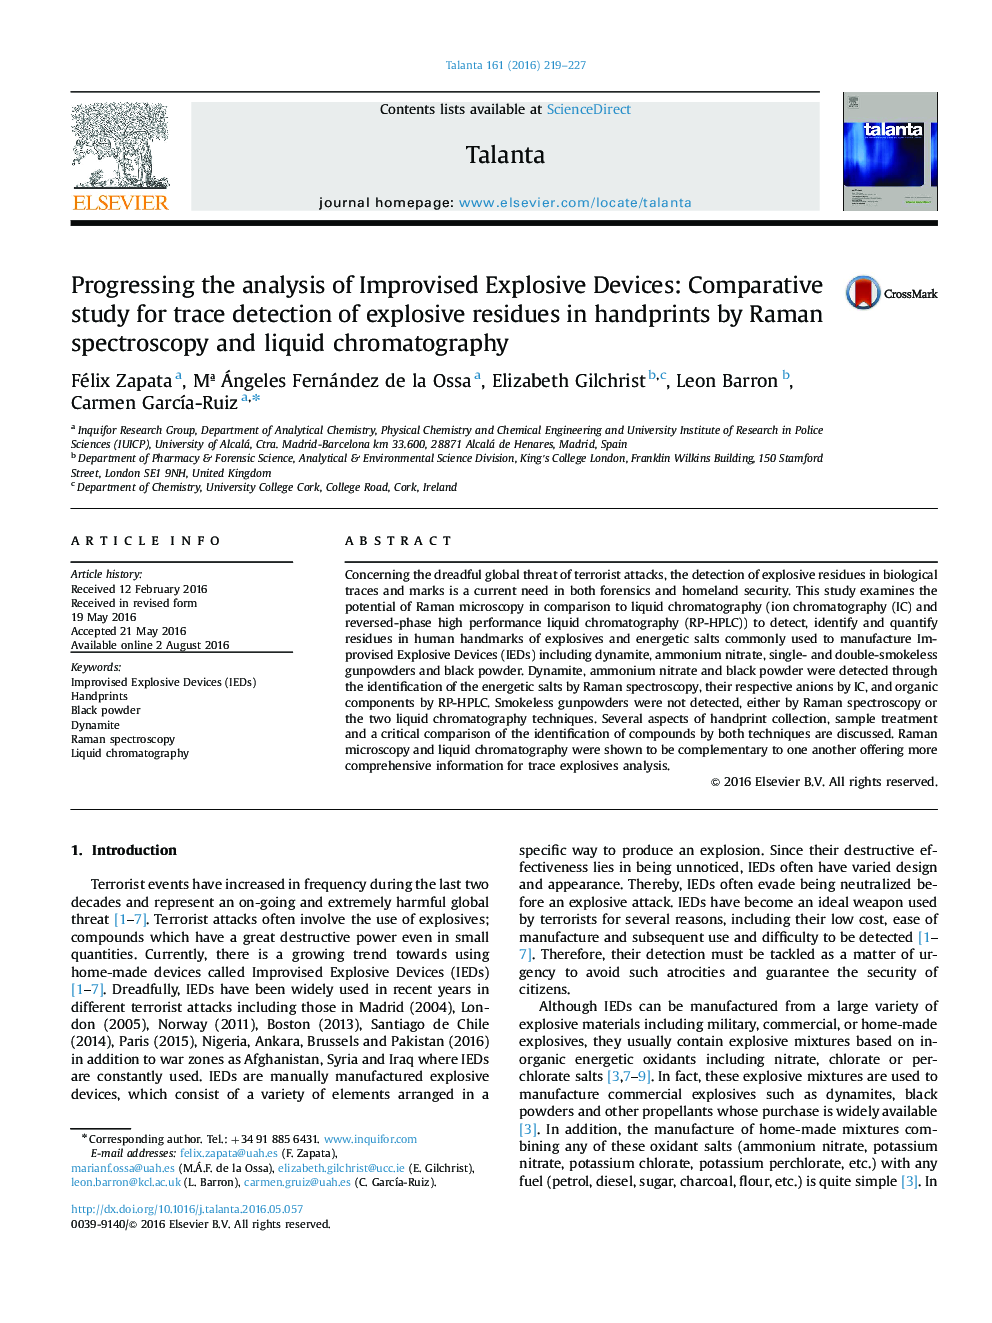 Progressing the analysis of Improvised Explosive Devices: Comparative study for trace detection of explosive residues in handprints by Raman spectroscopy and liquid chromatography